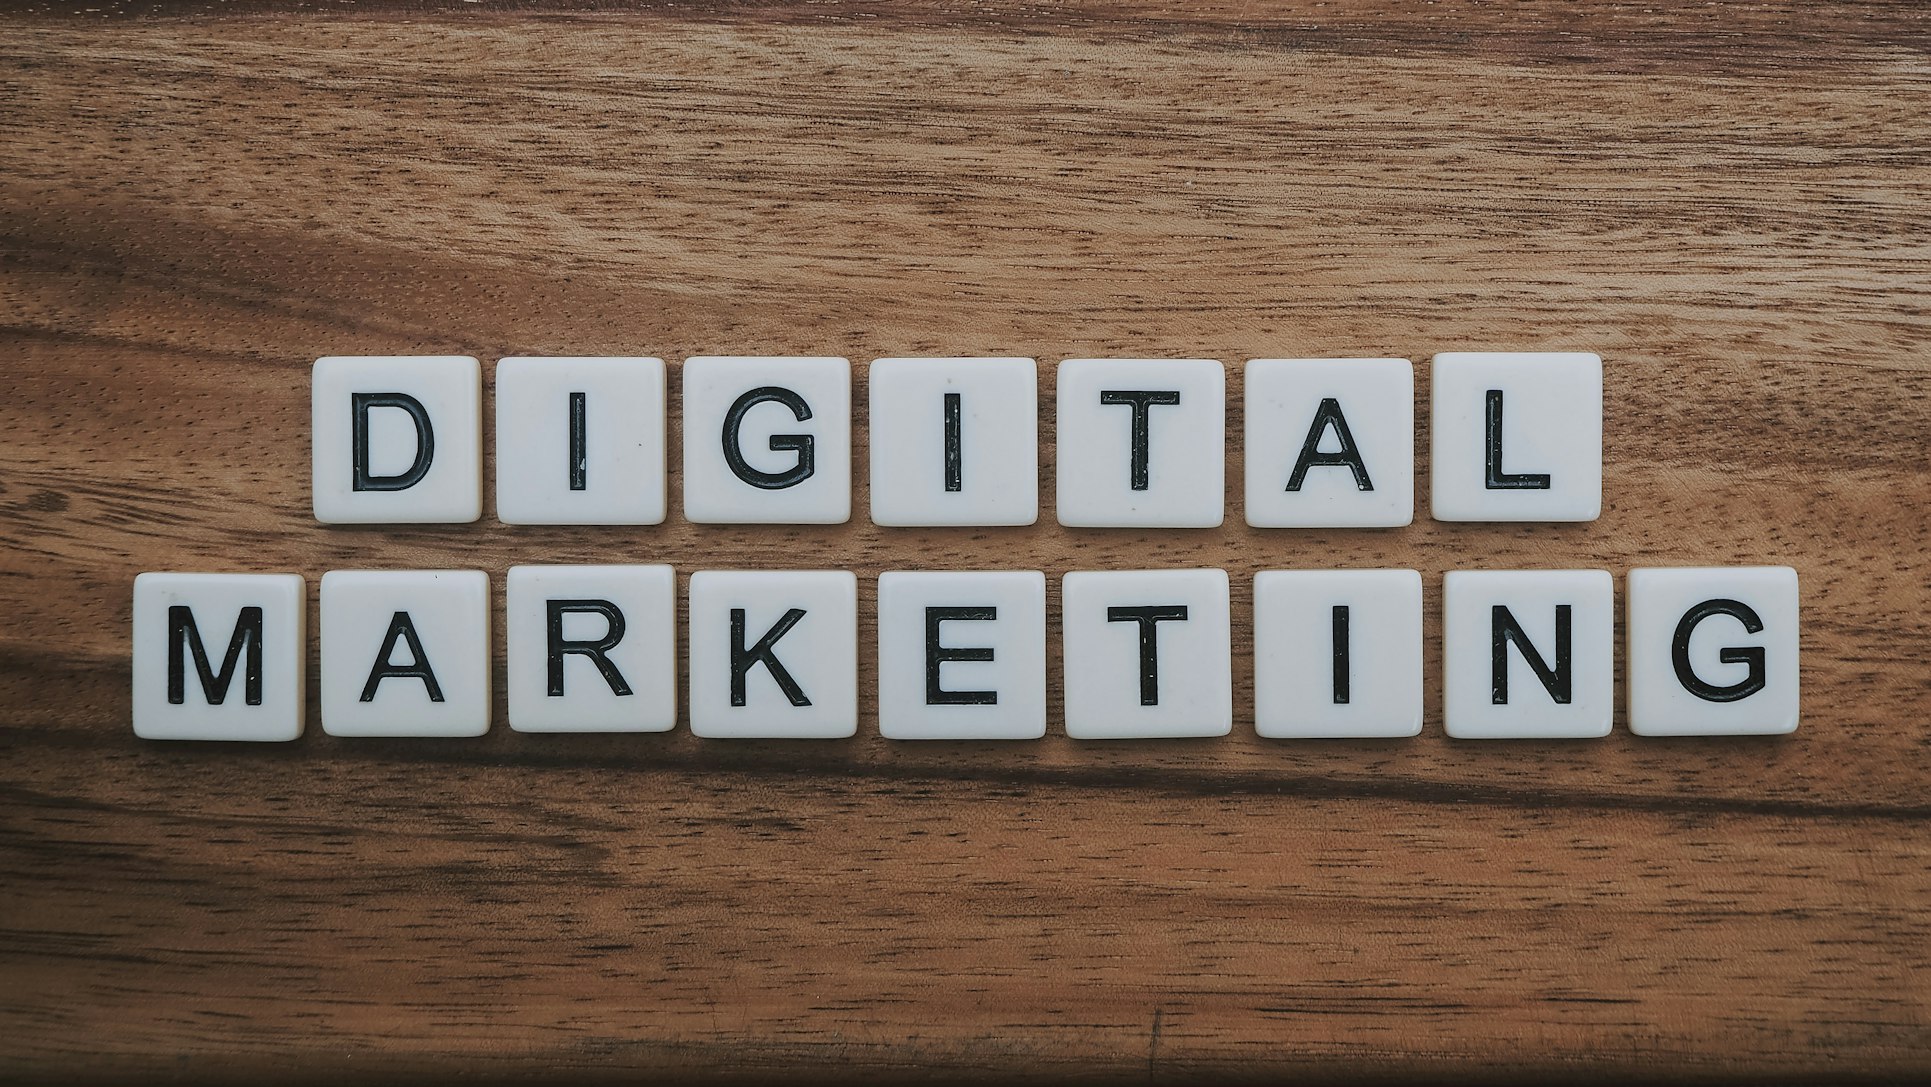 How to Hire the Best Digital Marketing Expert or Agency in Dubai